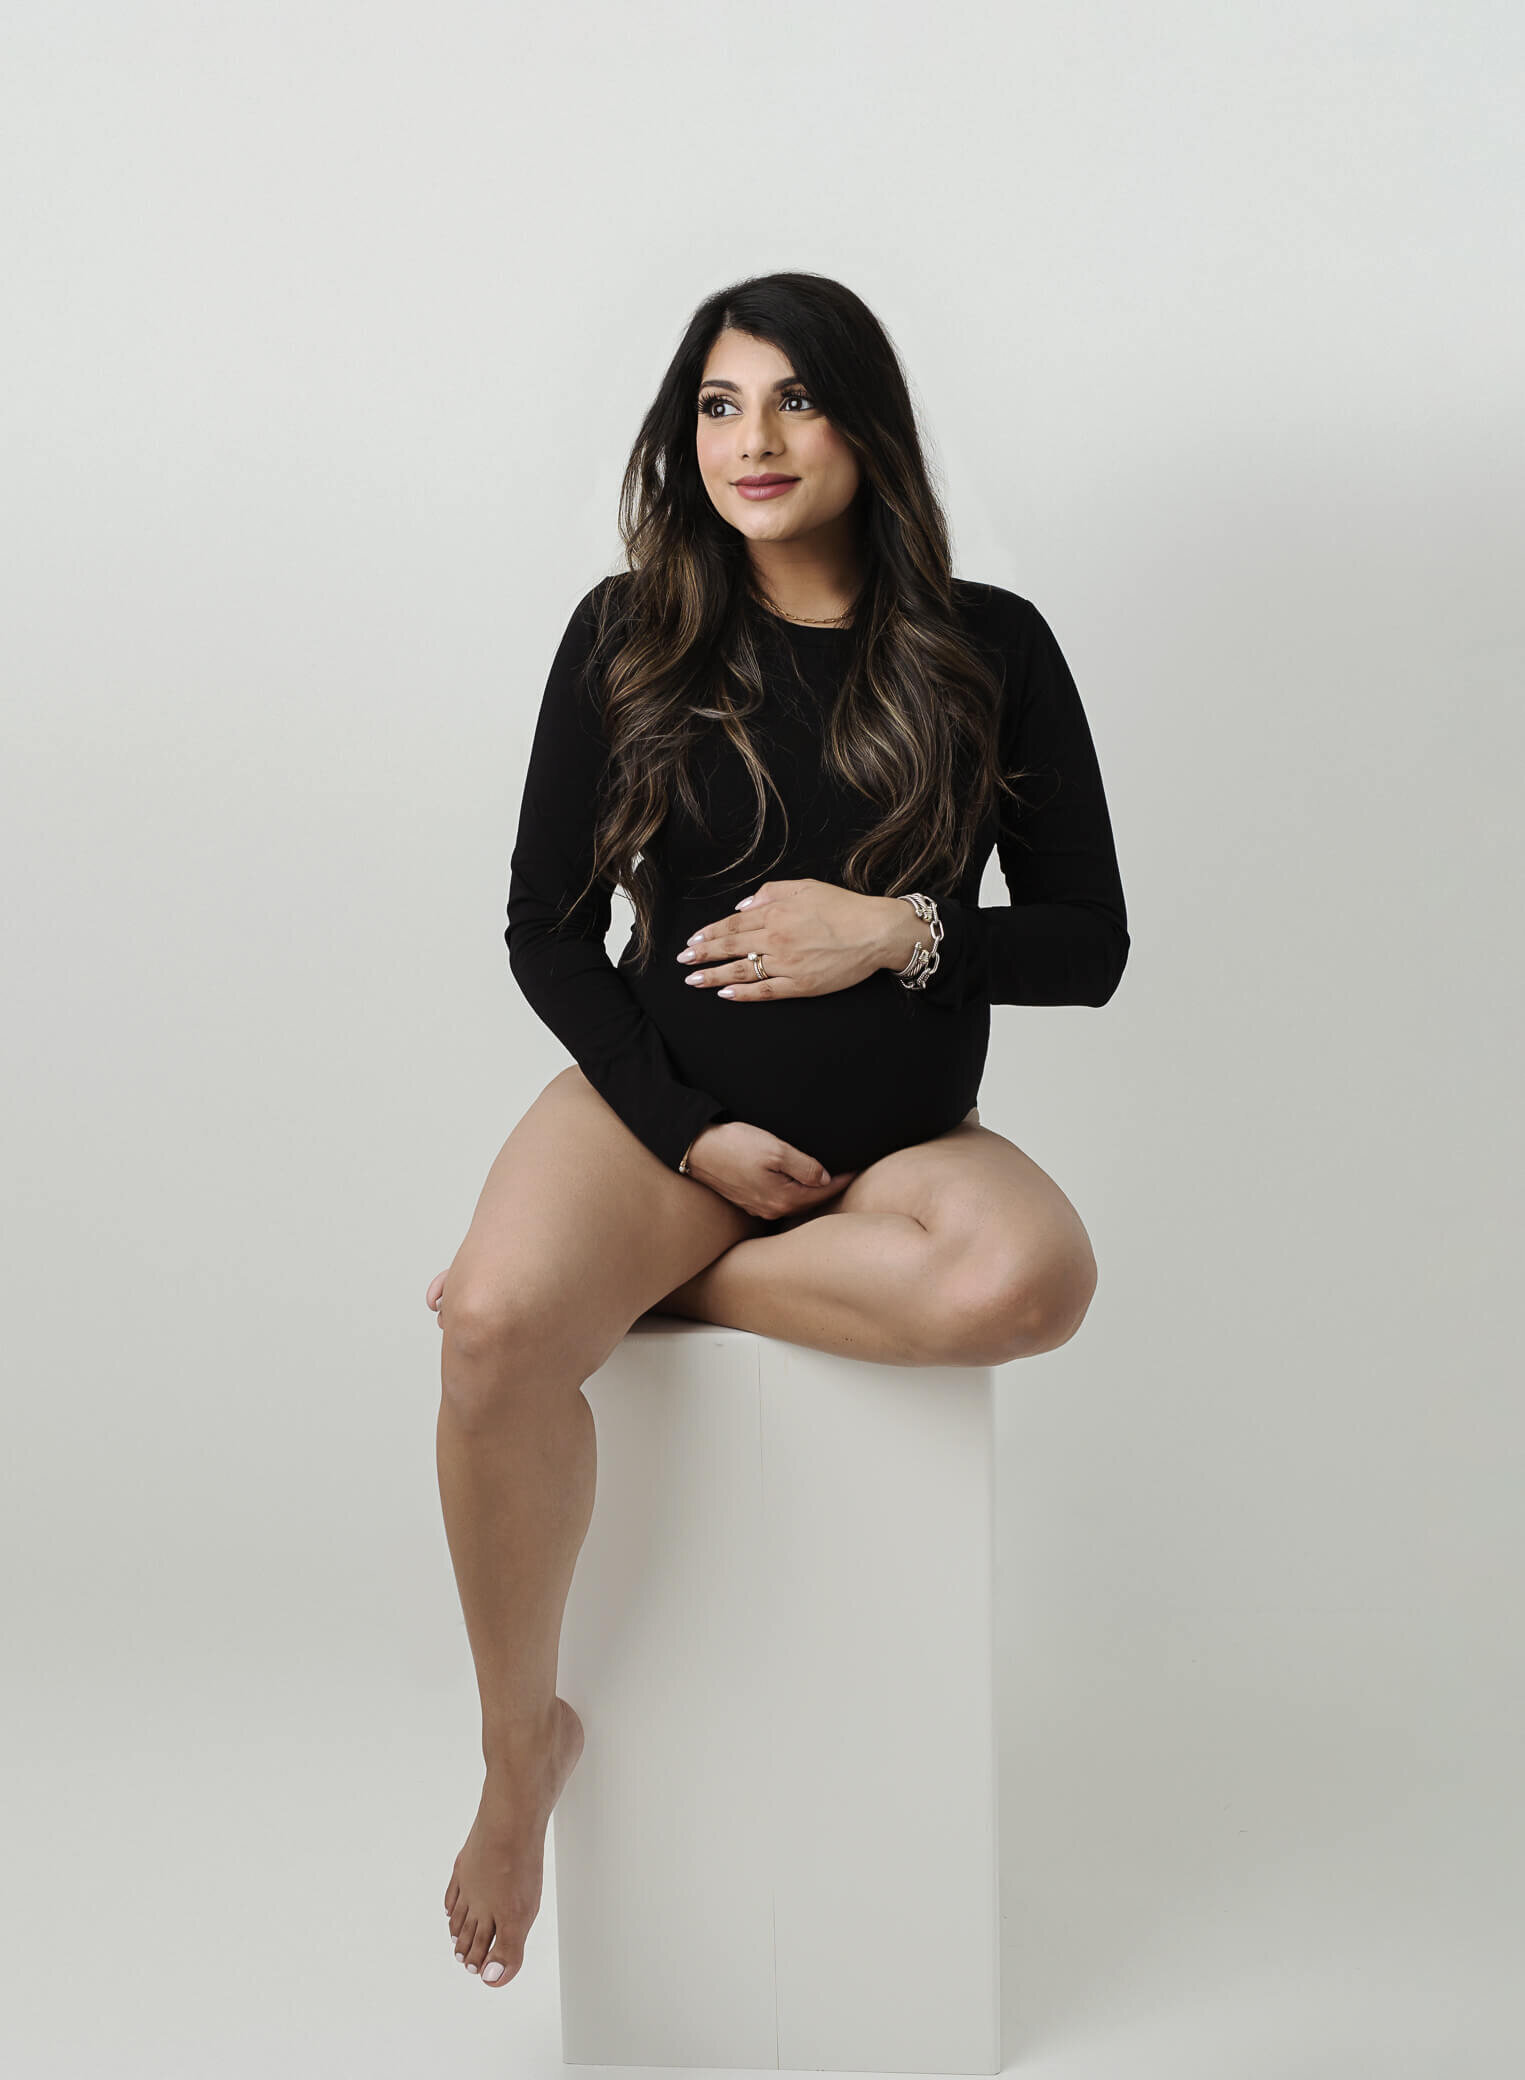 pregnant mom wearing black body suit, on a white background